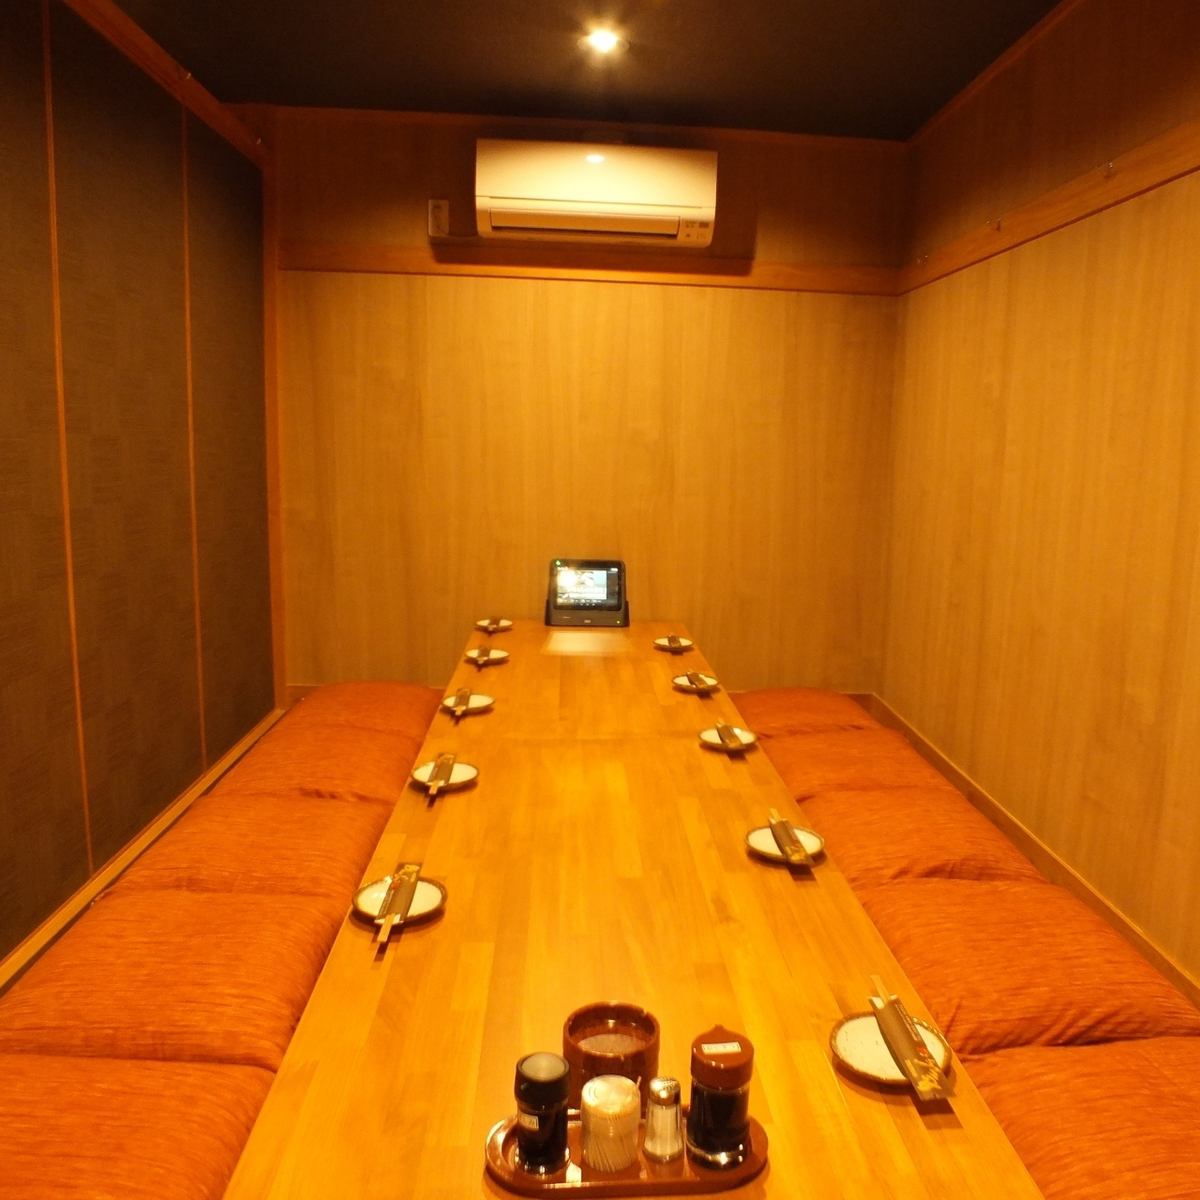 Special benefits for groups of 10 or more!! Large private room available for up to 32 people